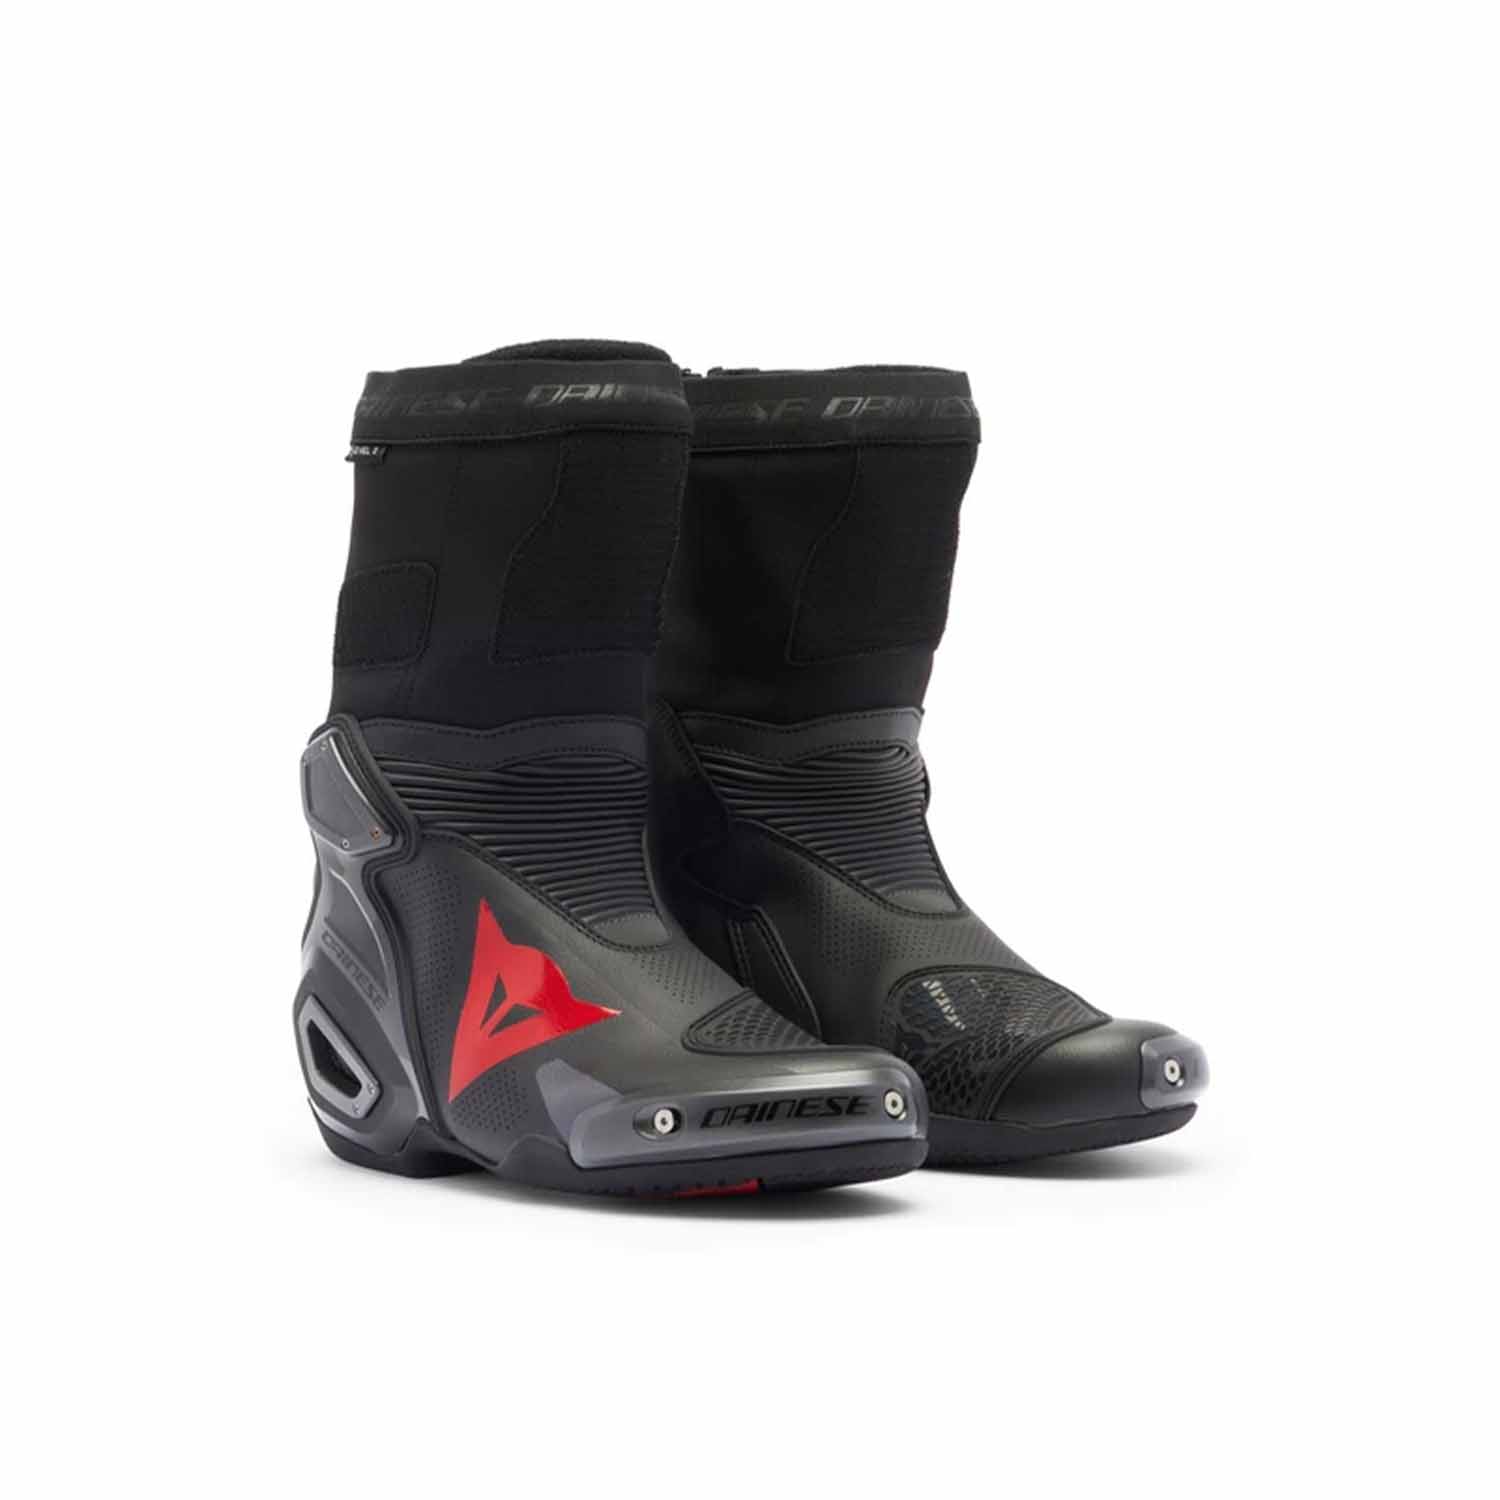 Image of Dainese Axial 2 Air Boots Black Black Red Fluo Größe 40